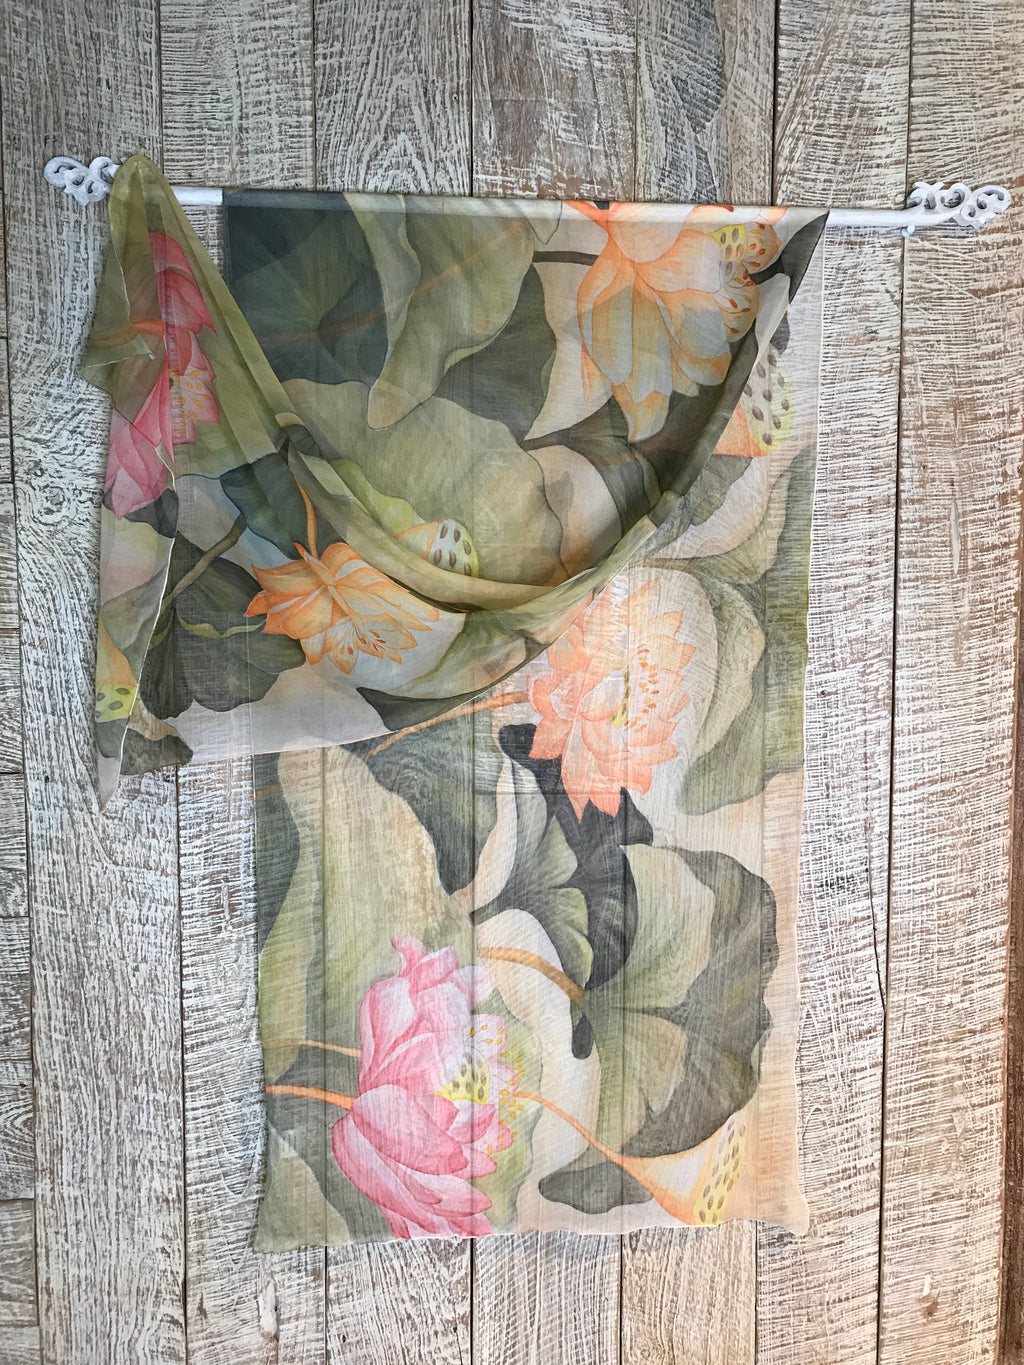 Hand Painted lotus on silk chiffon scarf in pastel greens, soft oranges and pinks on see through silk.